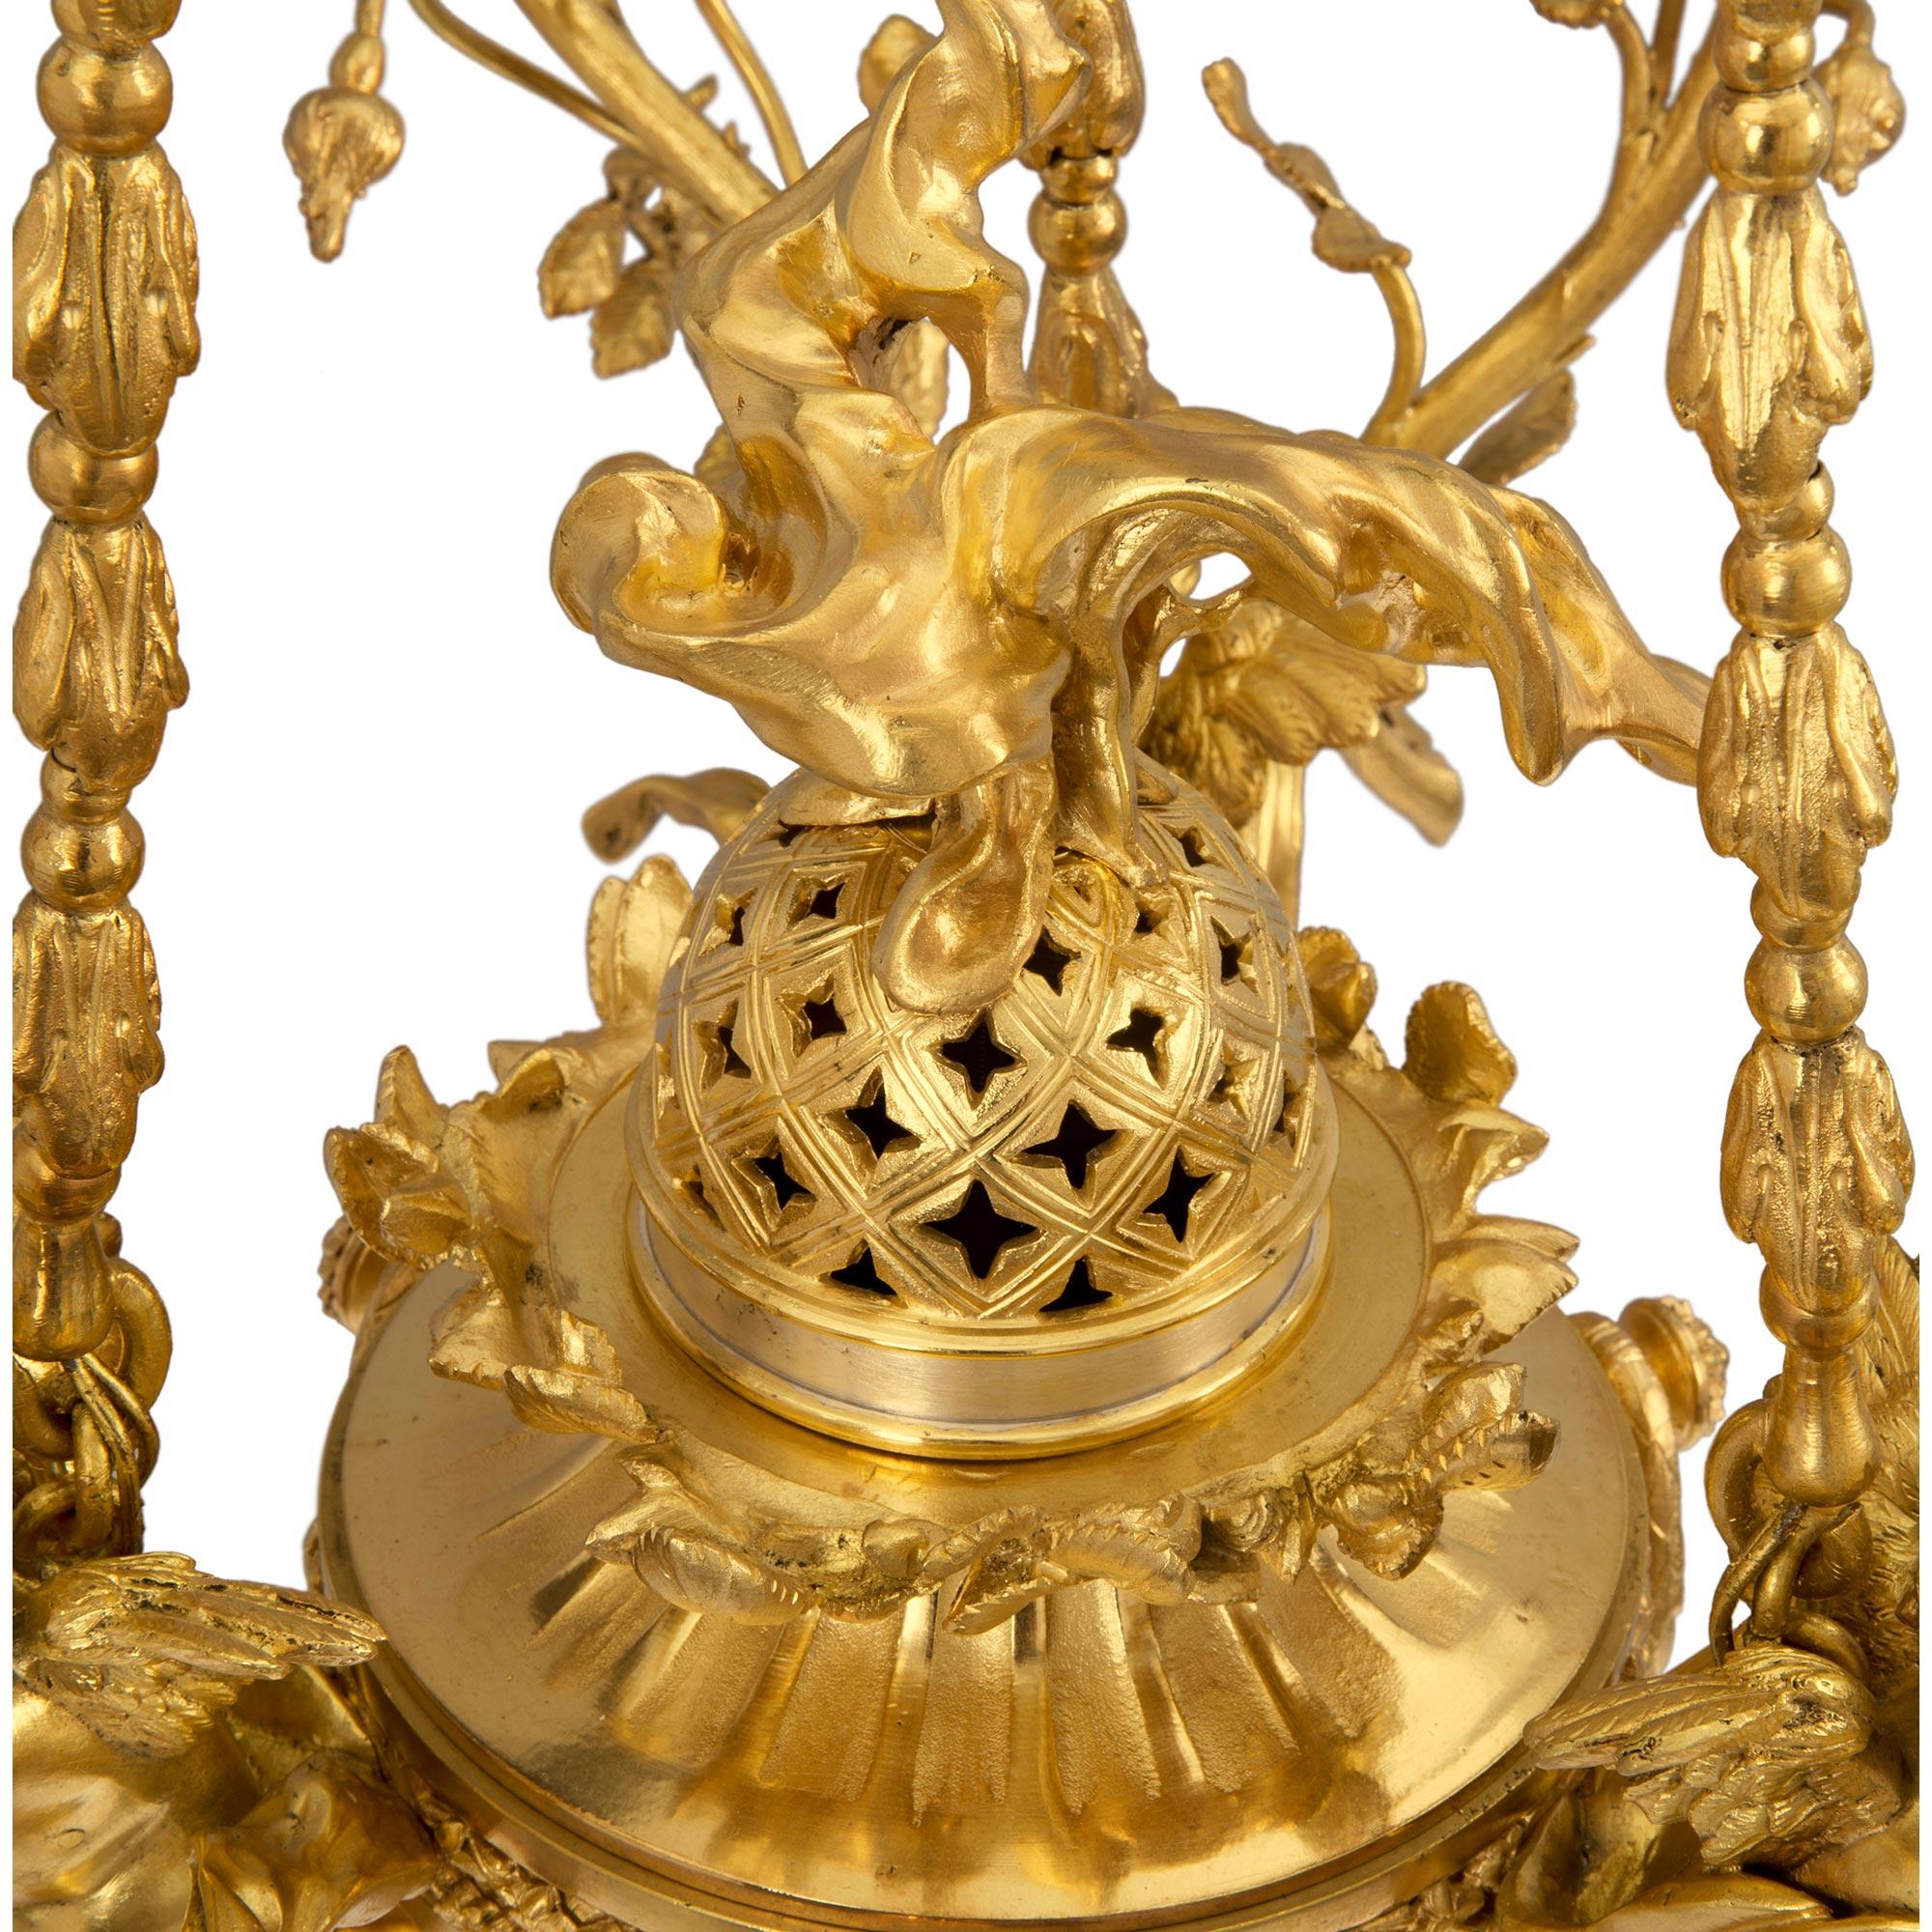 French 19th Century Louis XVI Style Belle Époque Chandelier Attributed to Dasson For Sale 2